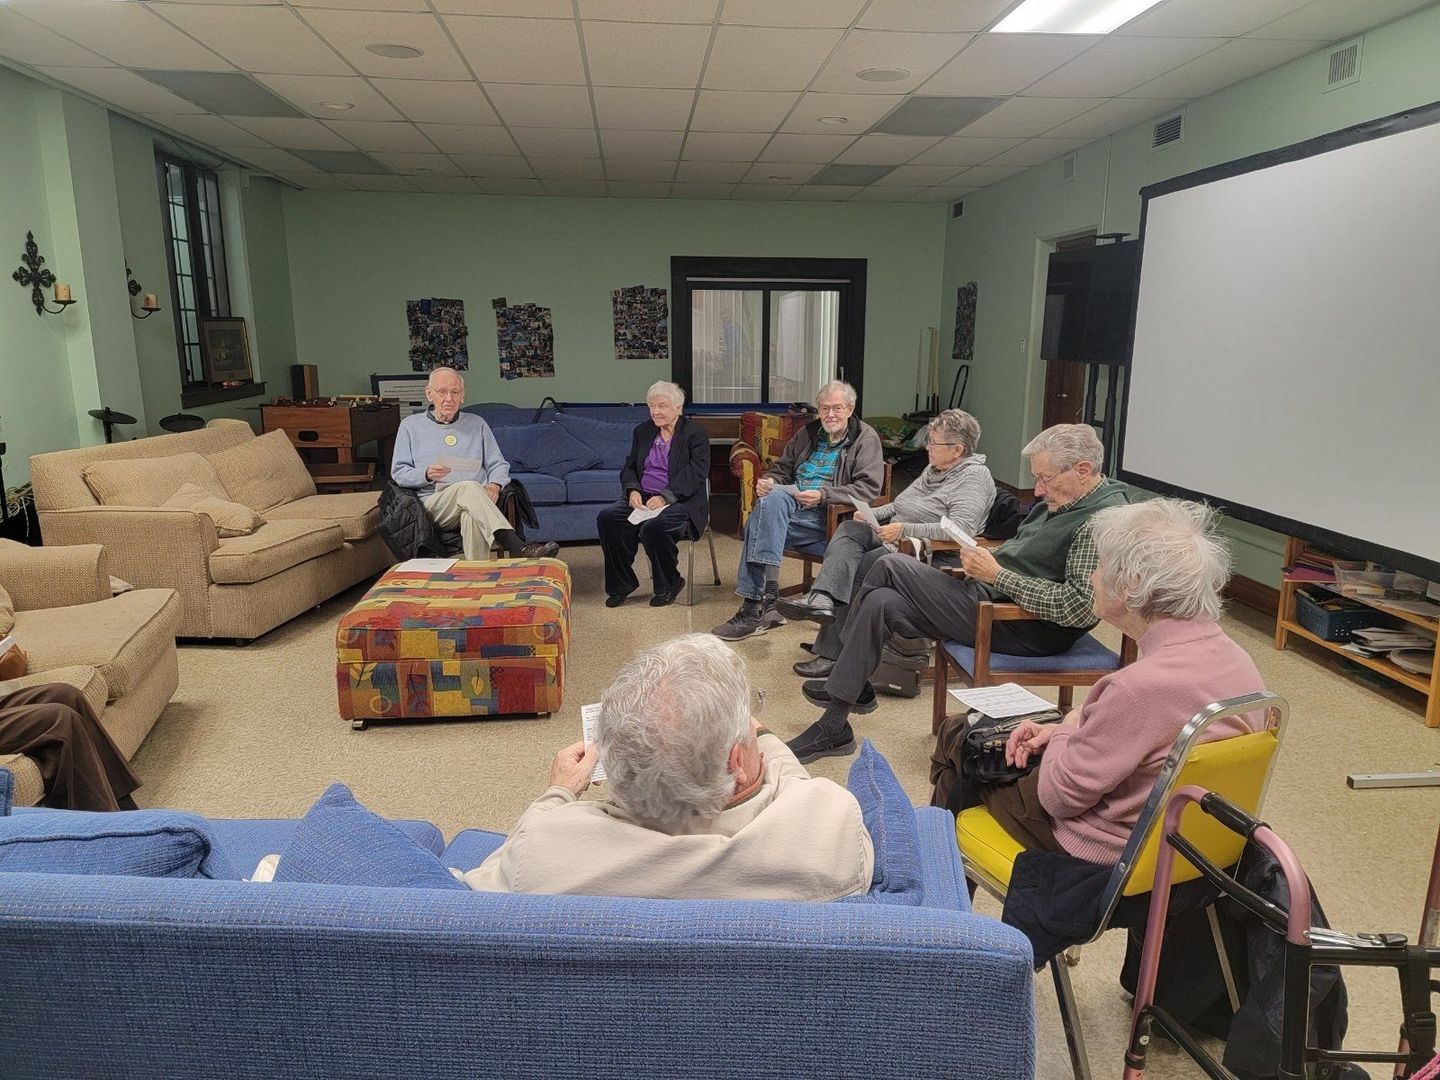 A group of elderly people are sitting in a circle in a living room.